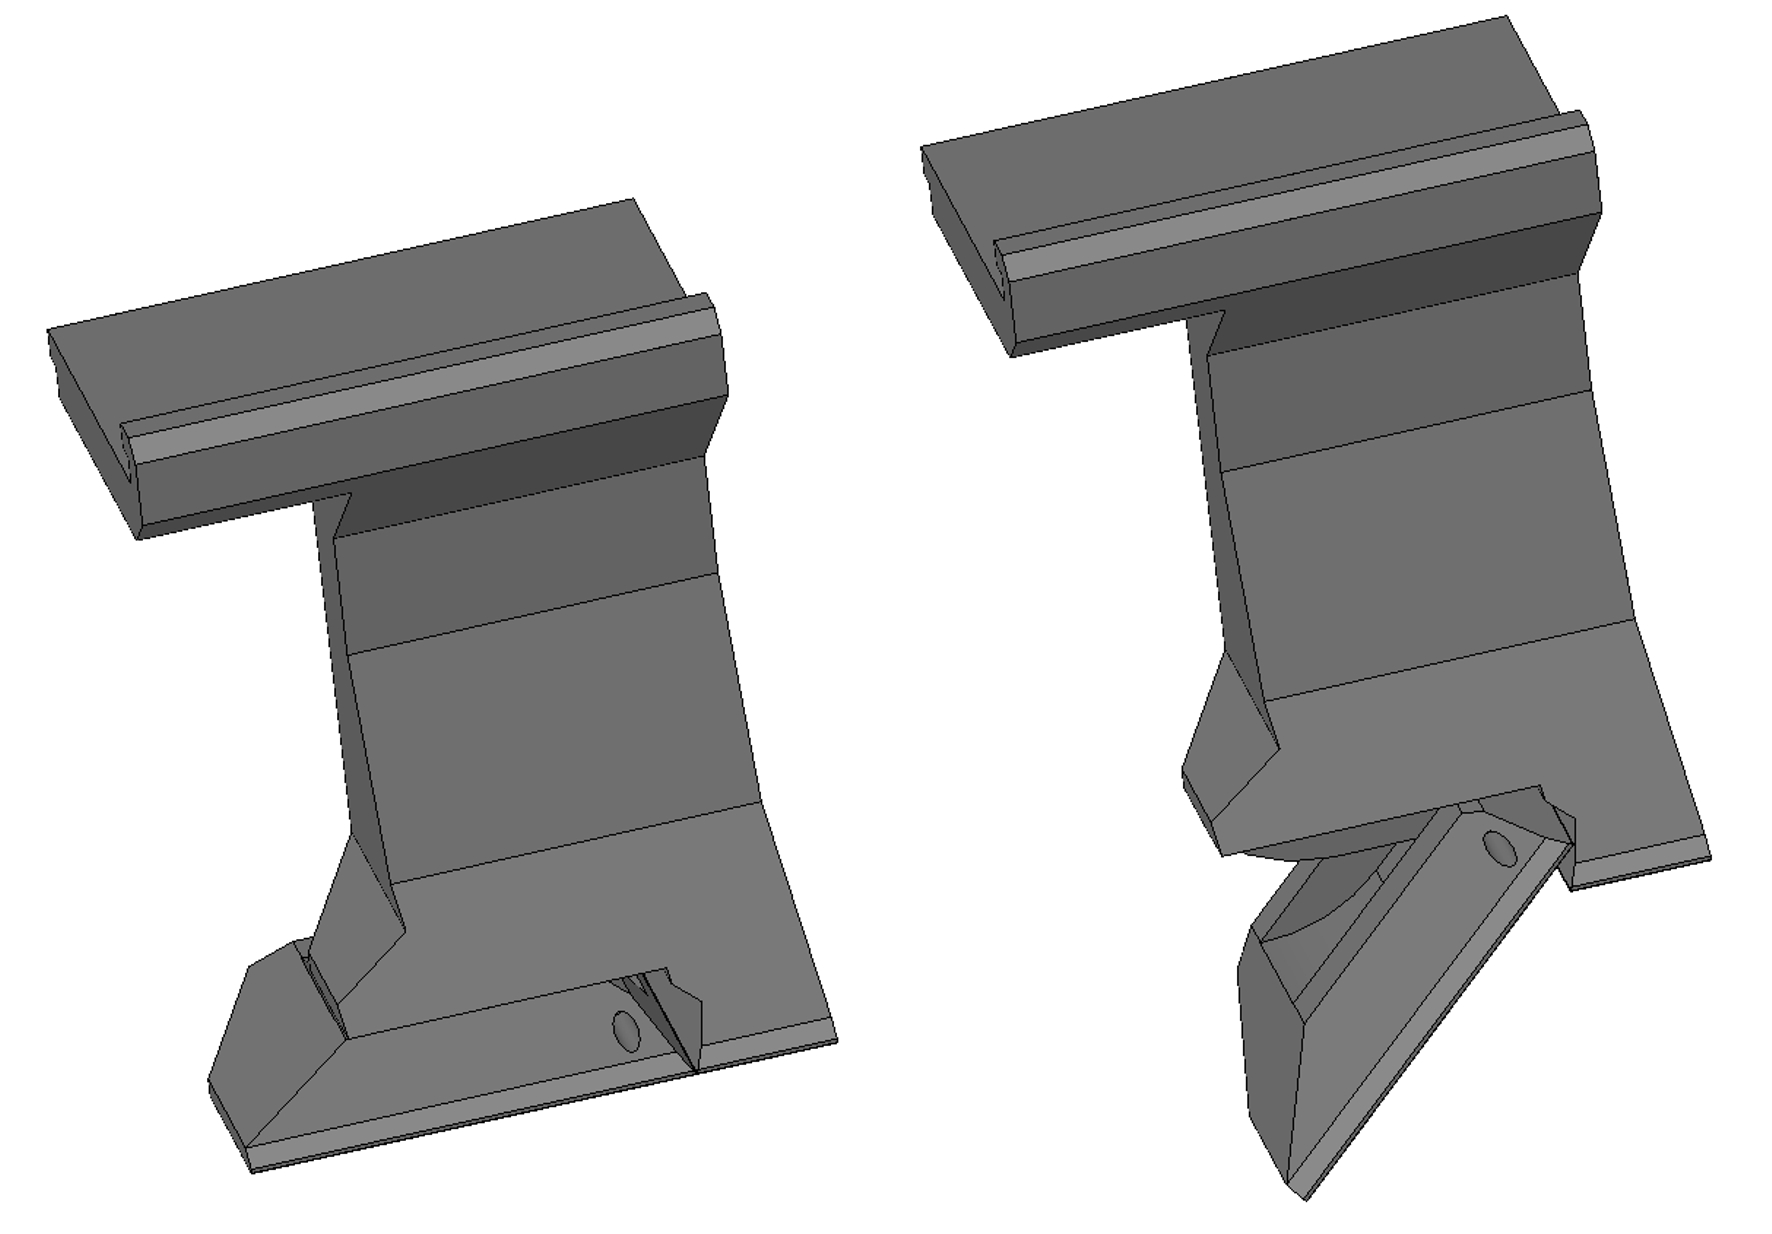 SnapTool in working position and with hinged down foot